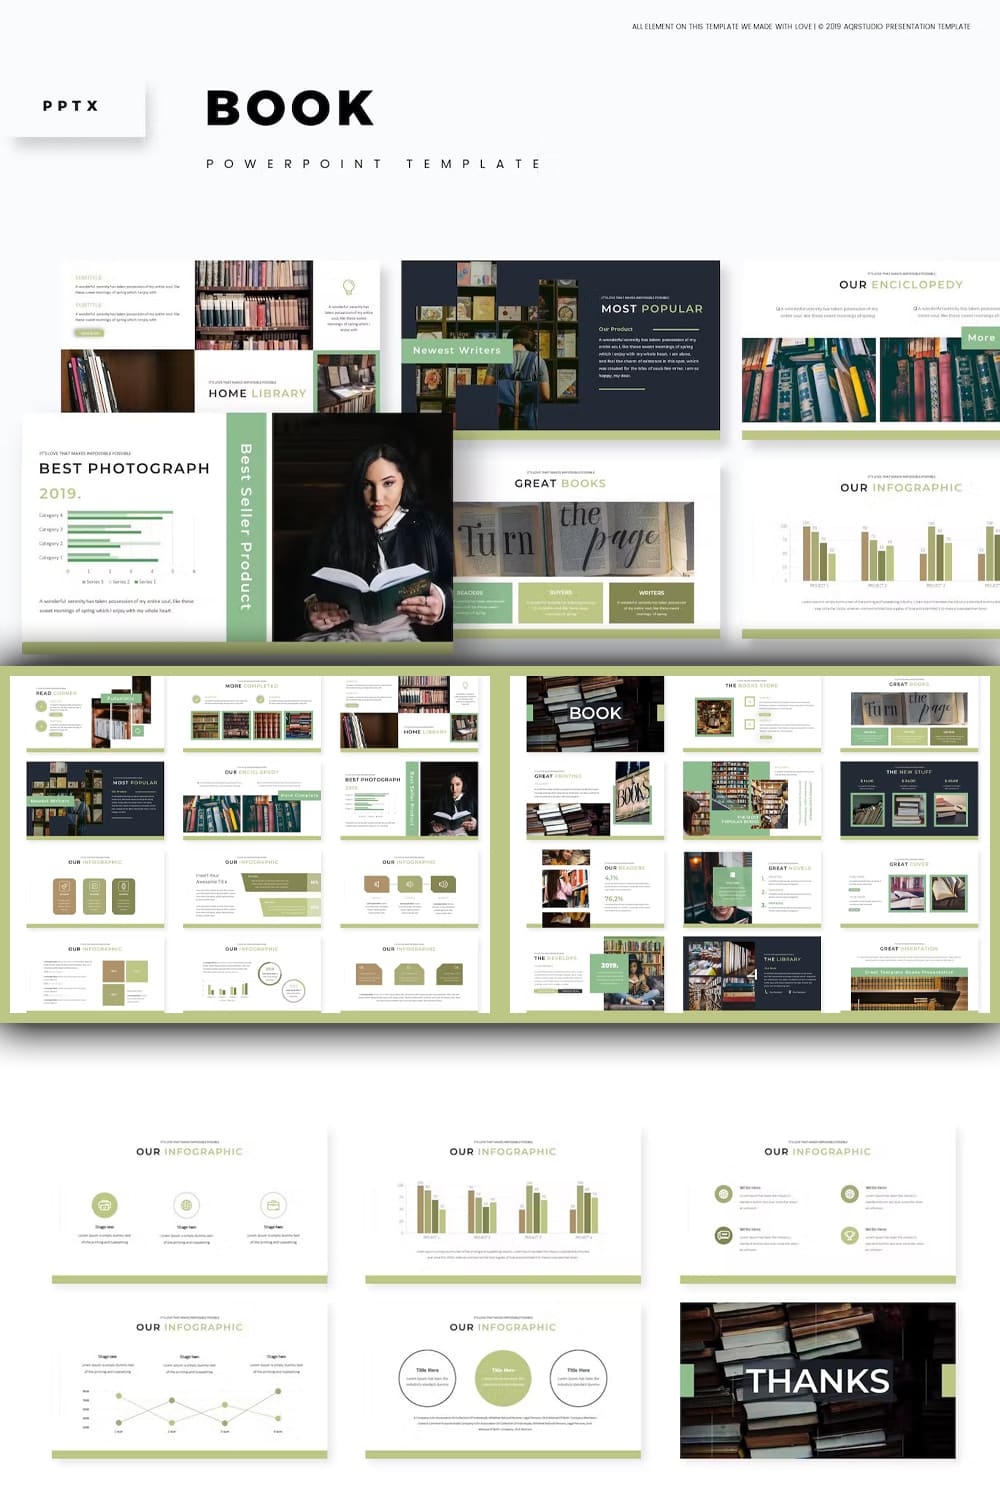 Most popular literature of Book - Powerpoint Template.